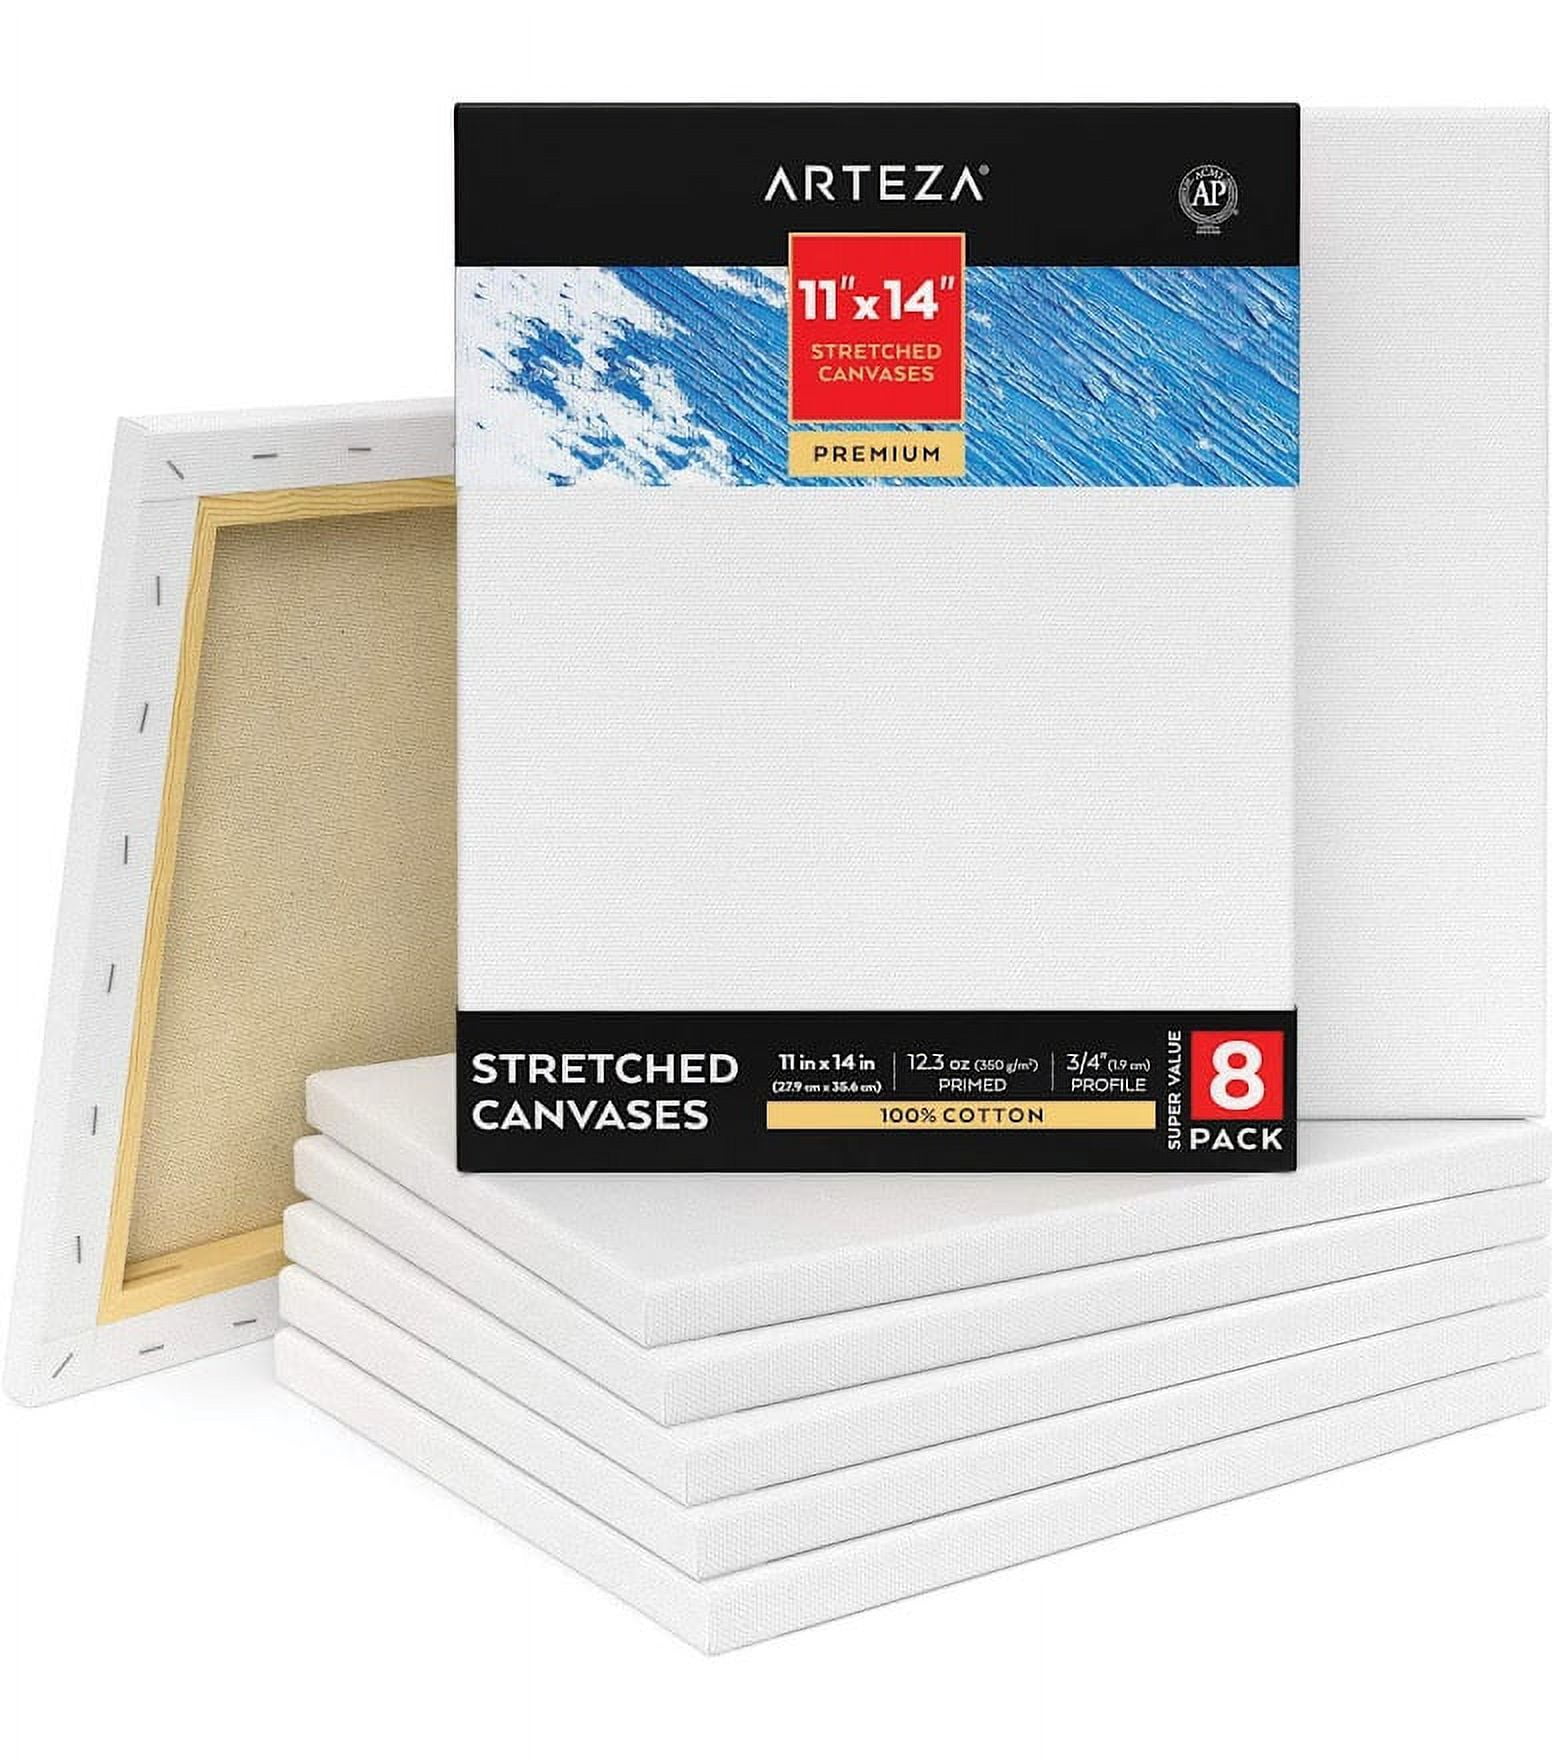 Arteza Stretched Canvas, Premium, White, 11x14, Blank Canvas Boards for  Painting - 8 Pack 